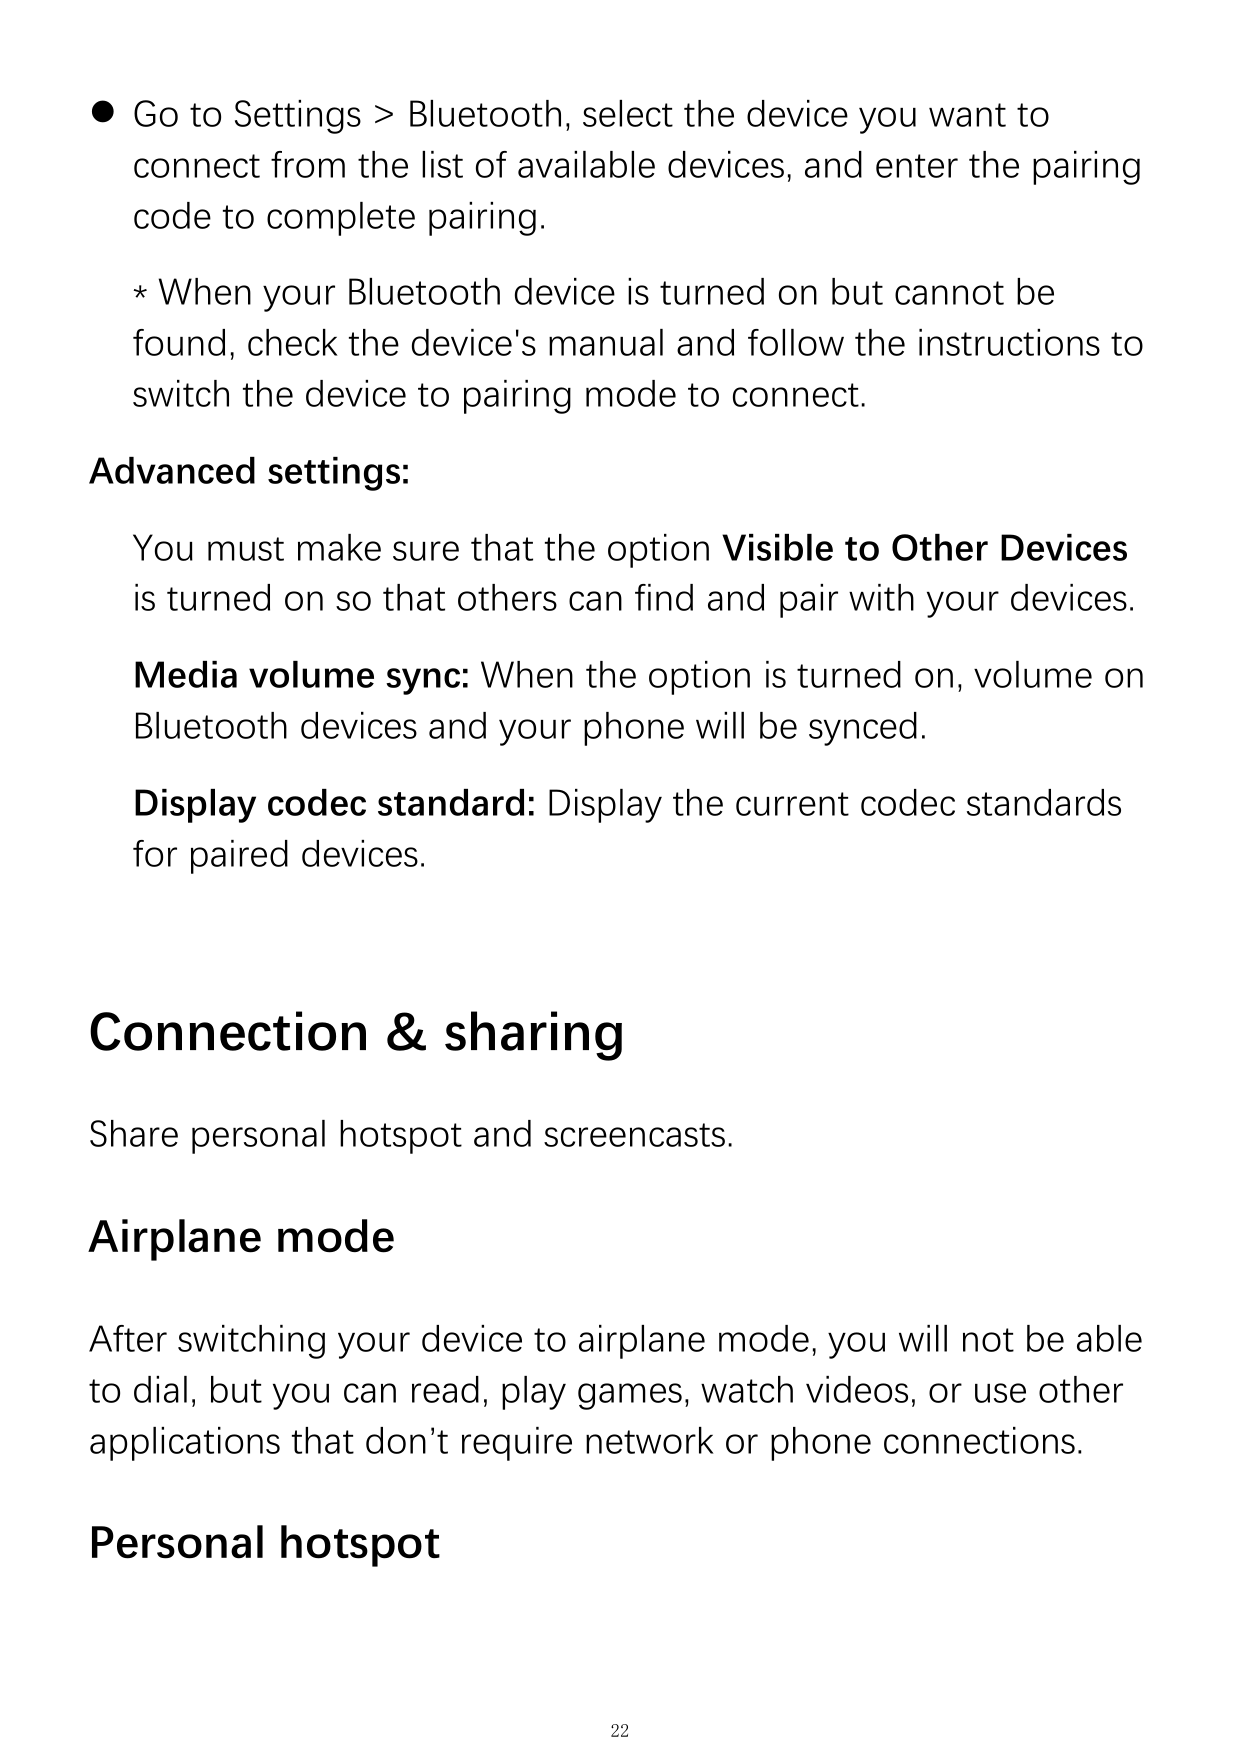 ⚫ Go to Settings > Bluetooth, select the device you want toconnect from the list of available devices, and enter the pairingcode